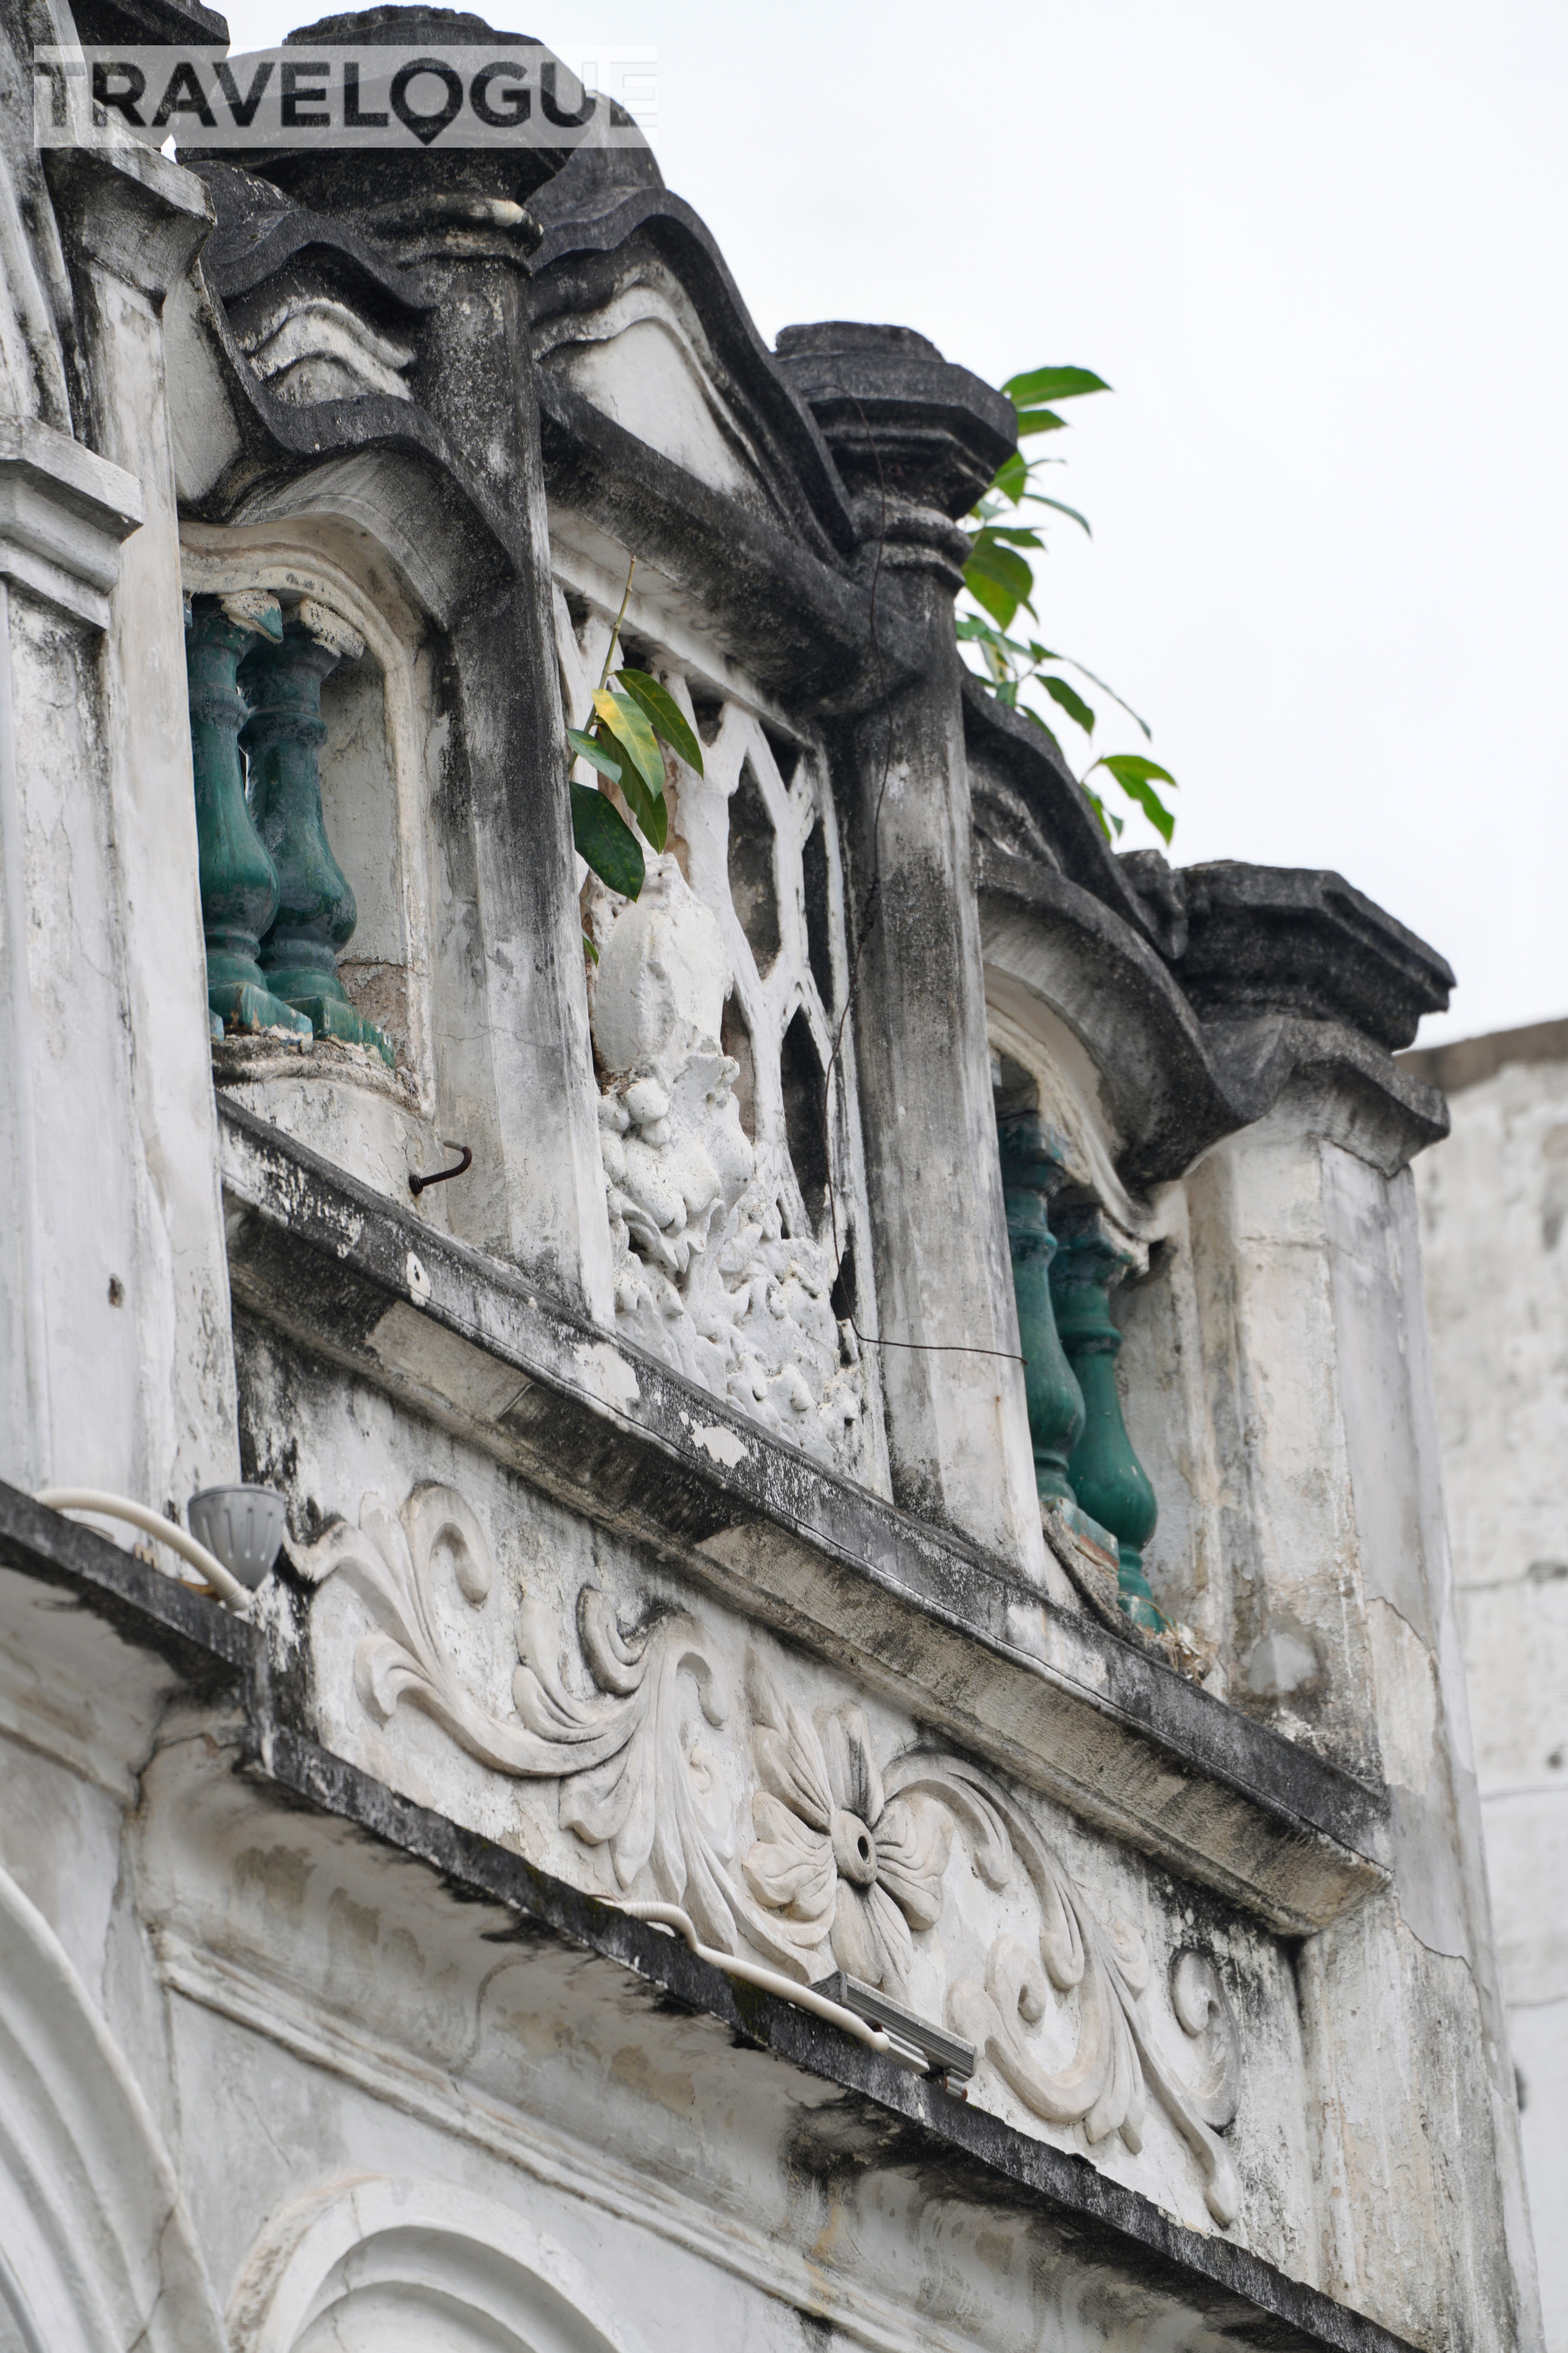 The columns and eaves of qilou buildings in Haikou, Hainan are decorated with traditional Chinese designs, auspicious square patterns and Chinese knots. But they also reveal influences from classical western architecture, such as arched windows and Roman columns./CGTN